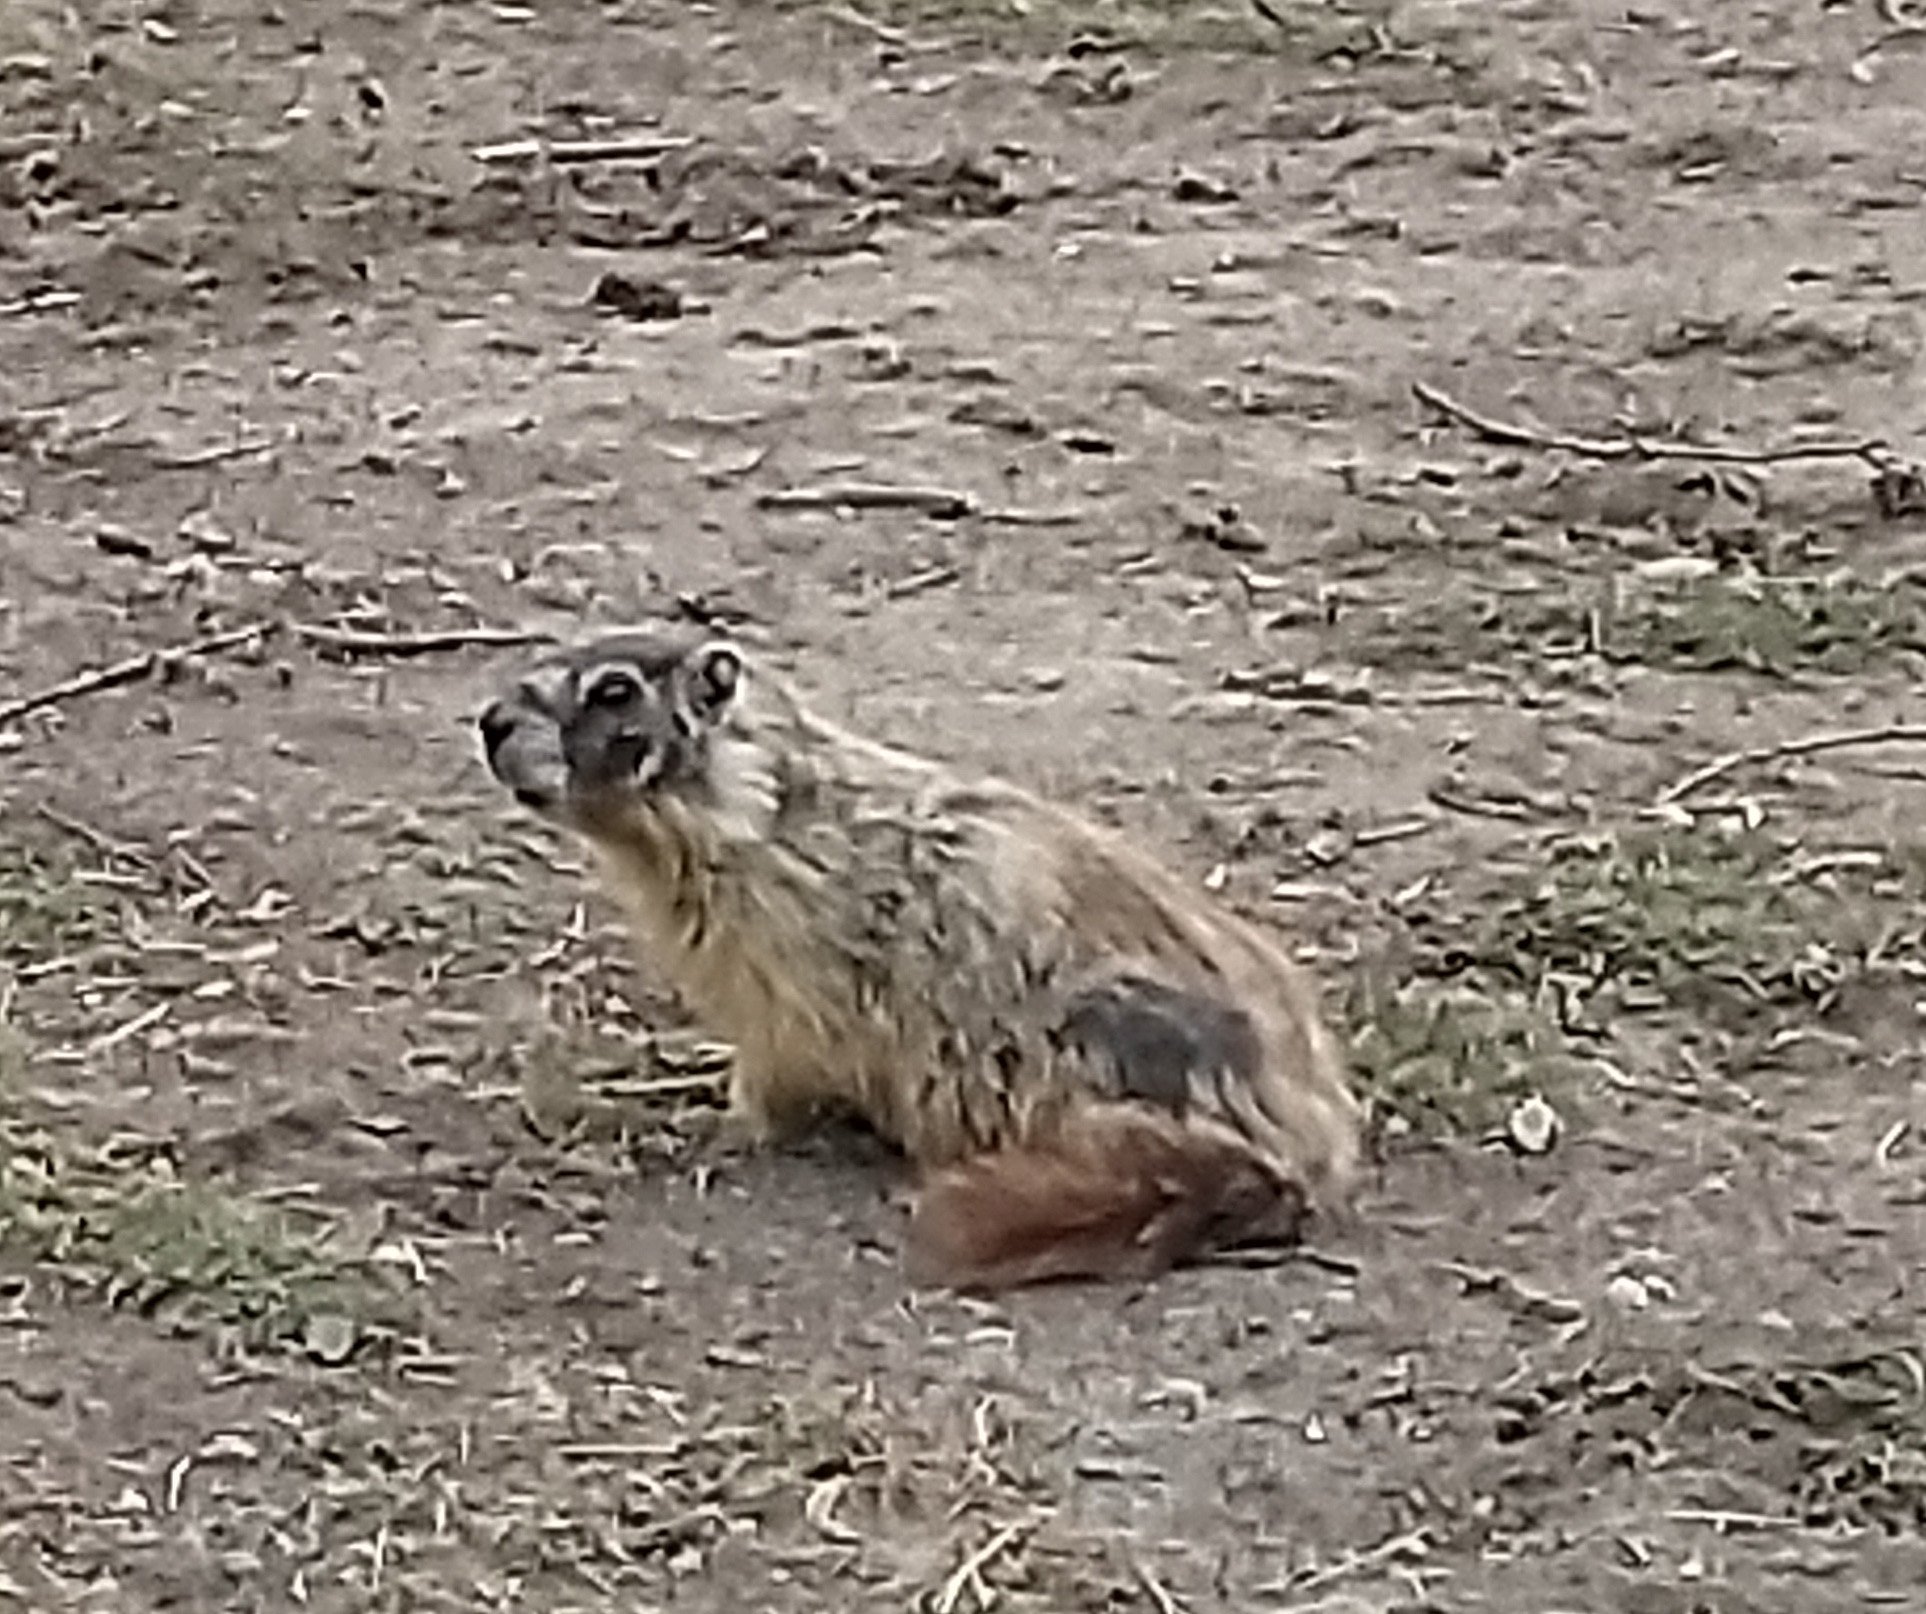 Last year's phone ( some crappy Motorolla ). This groundhog was much closer than the squirrel above. Very sad.